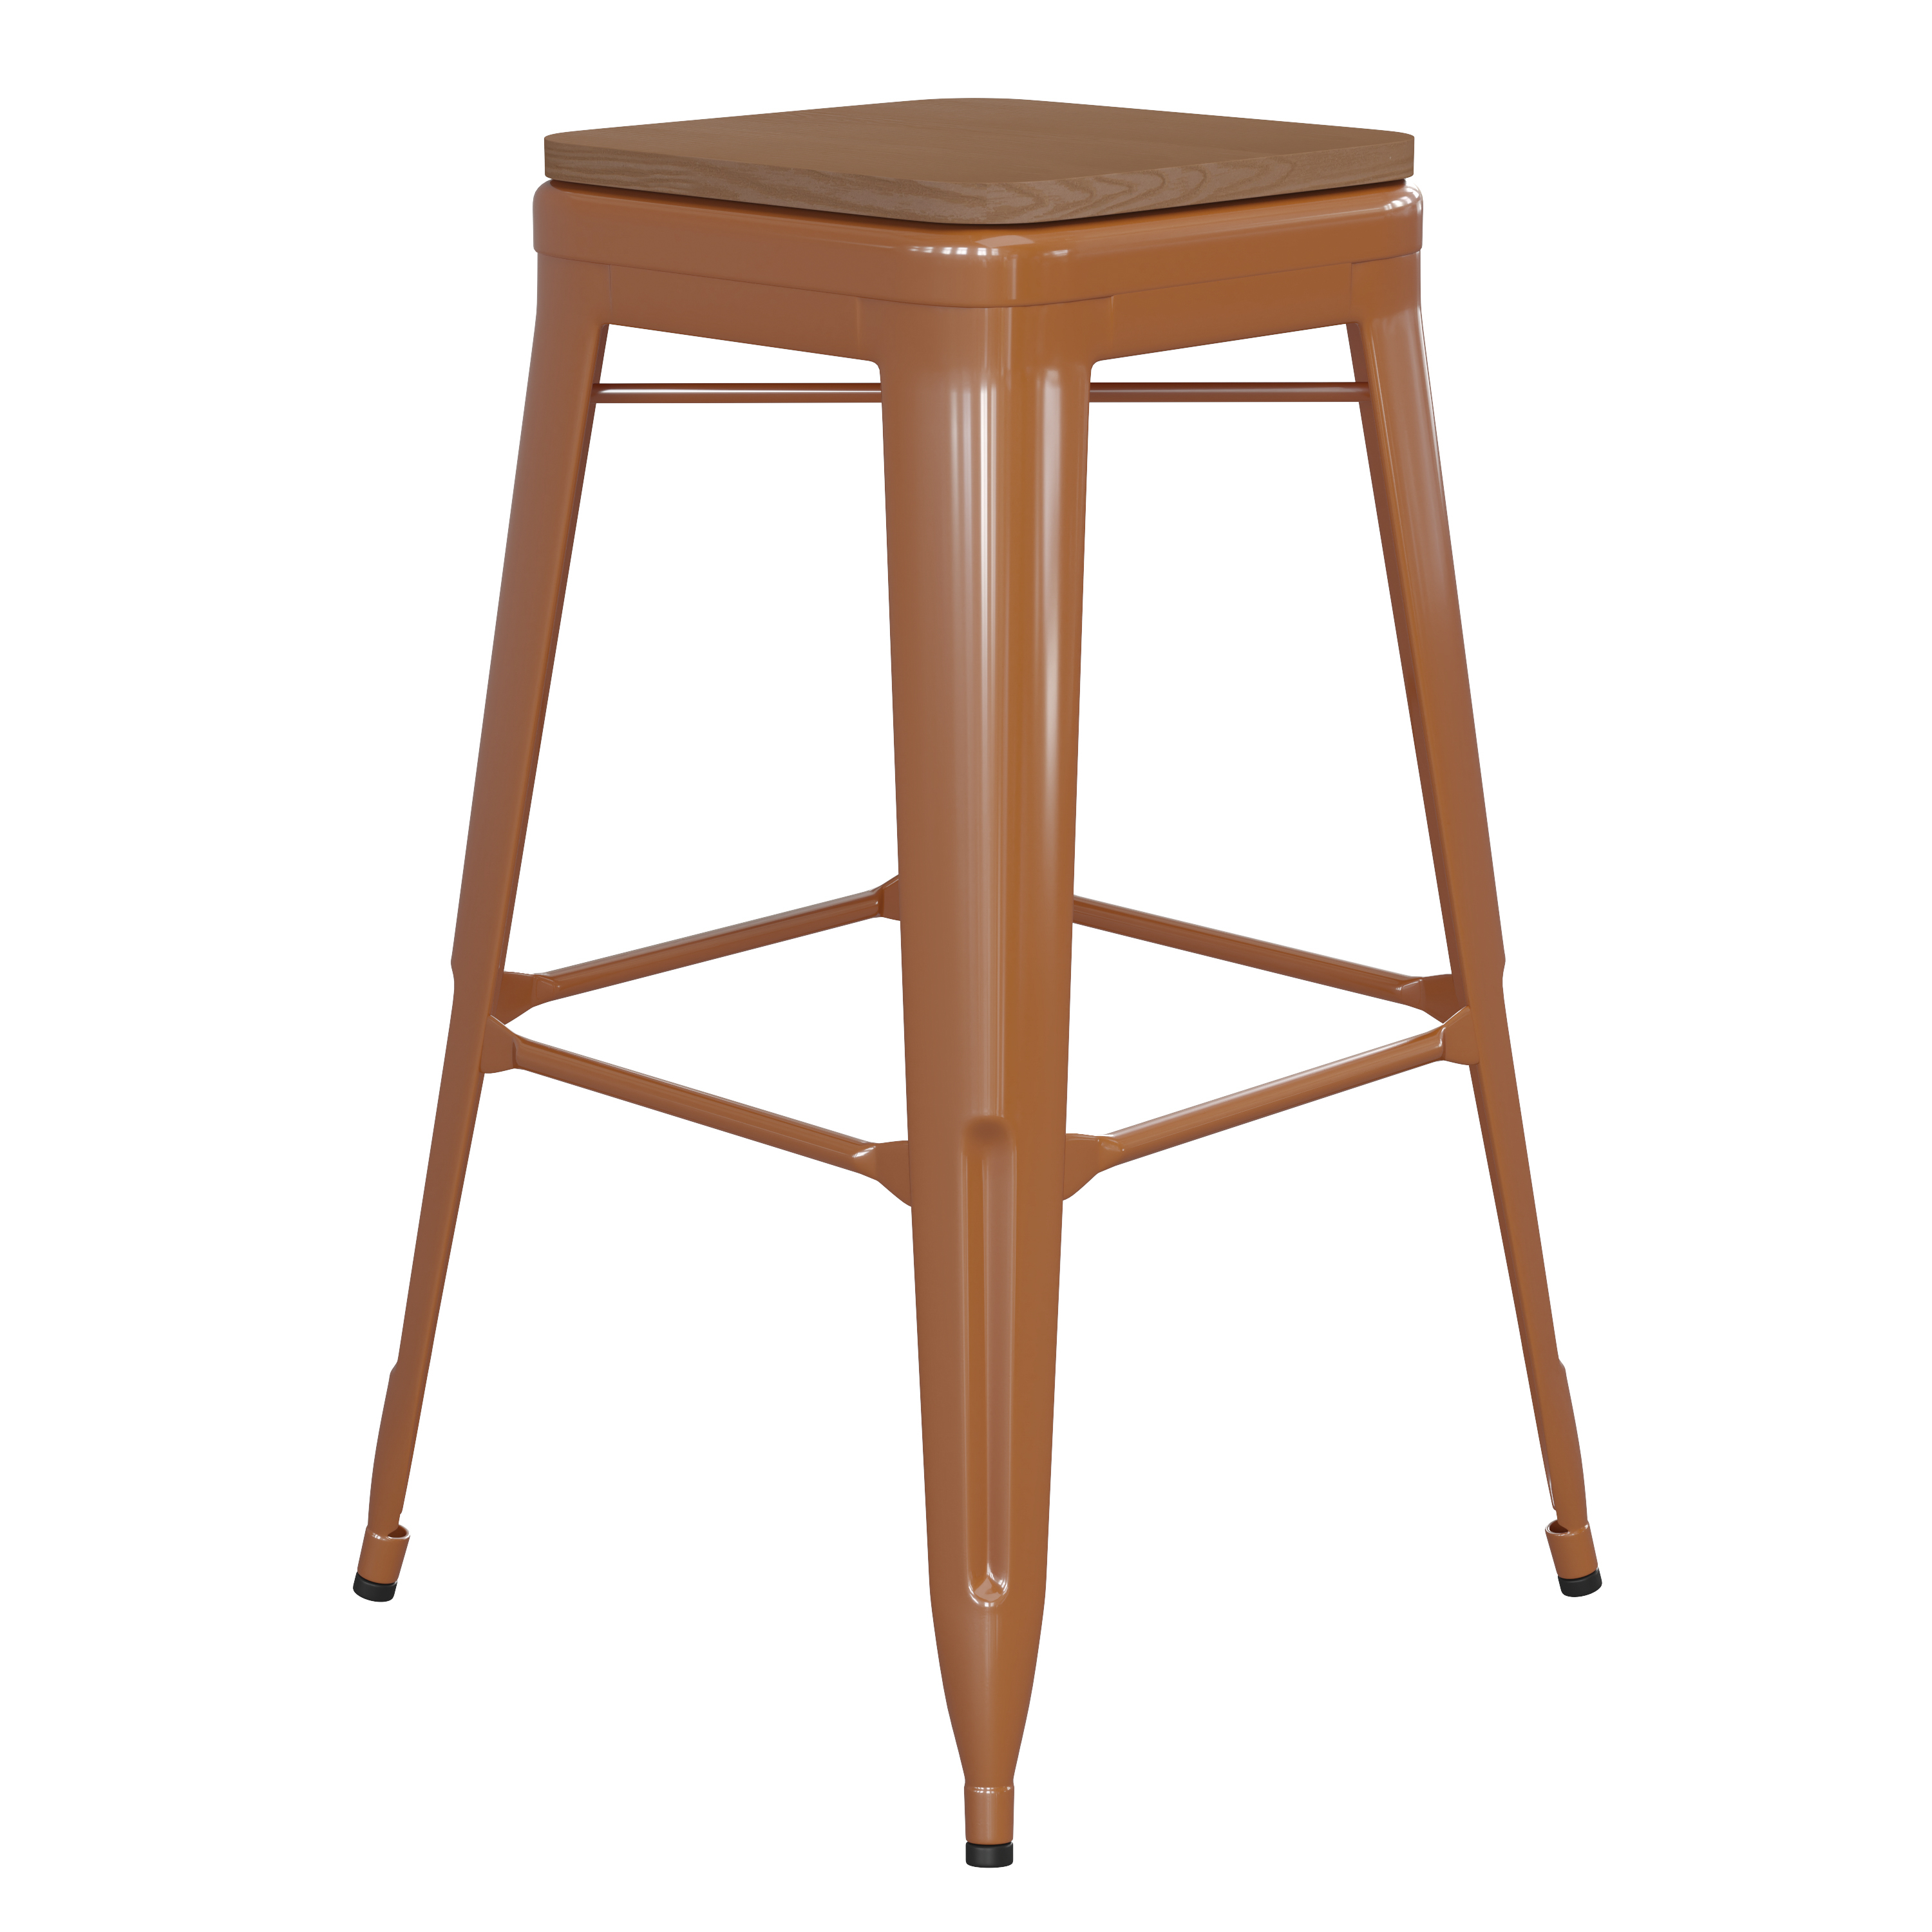 Flash Furniture CH-31320-30-OR-PL2T-GG 30" Orange Metal Indoor/Outdoor Barstool with Teak Poly Resin Wood Seat